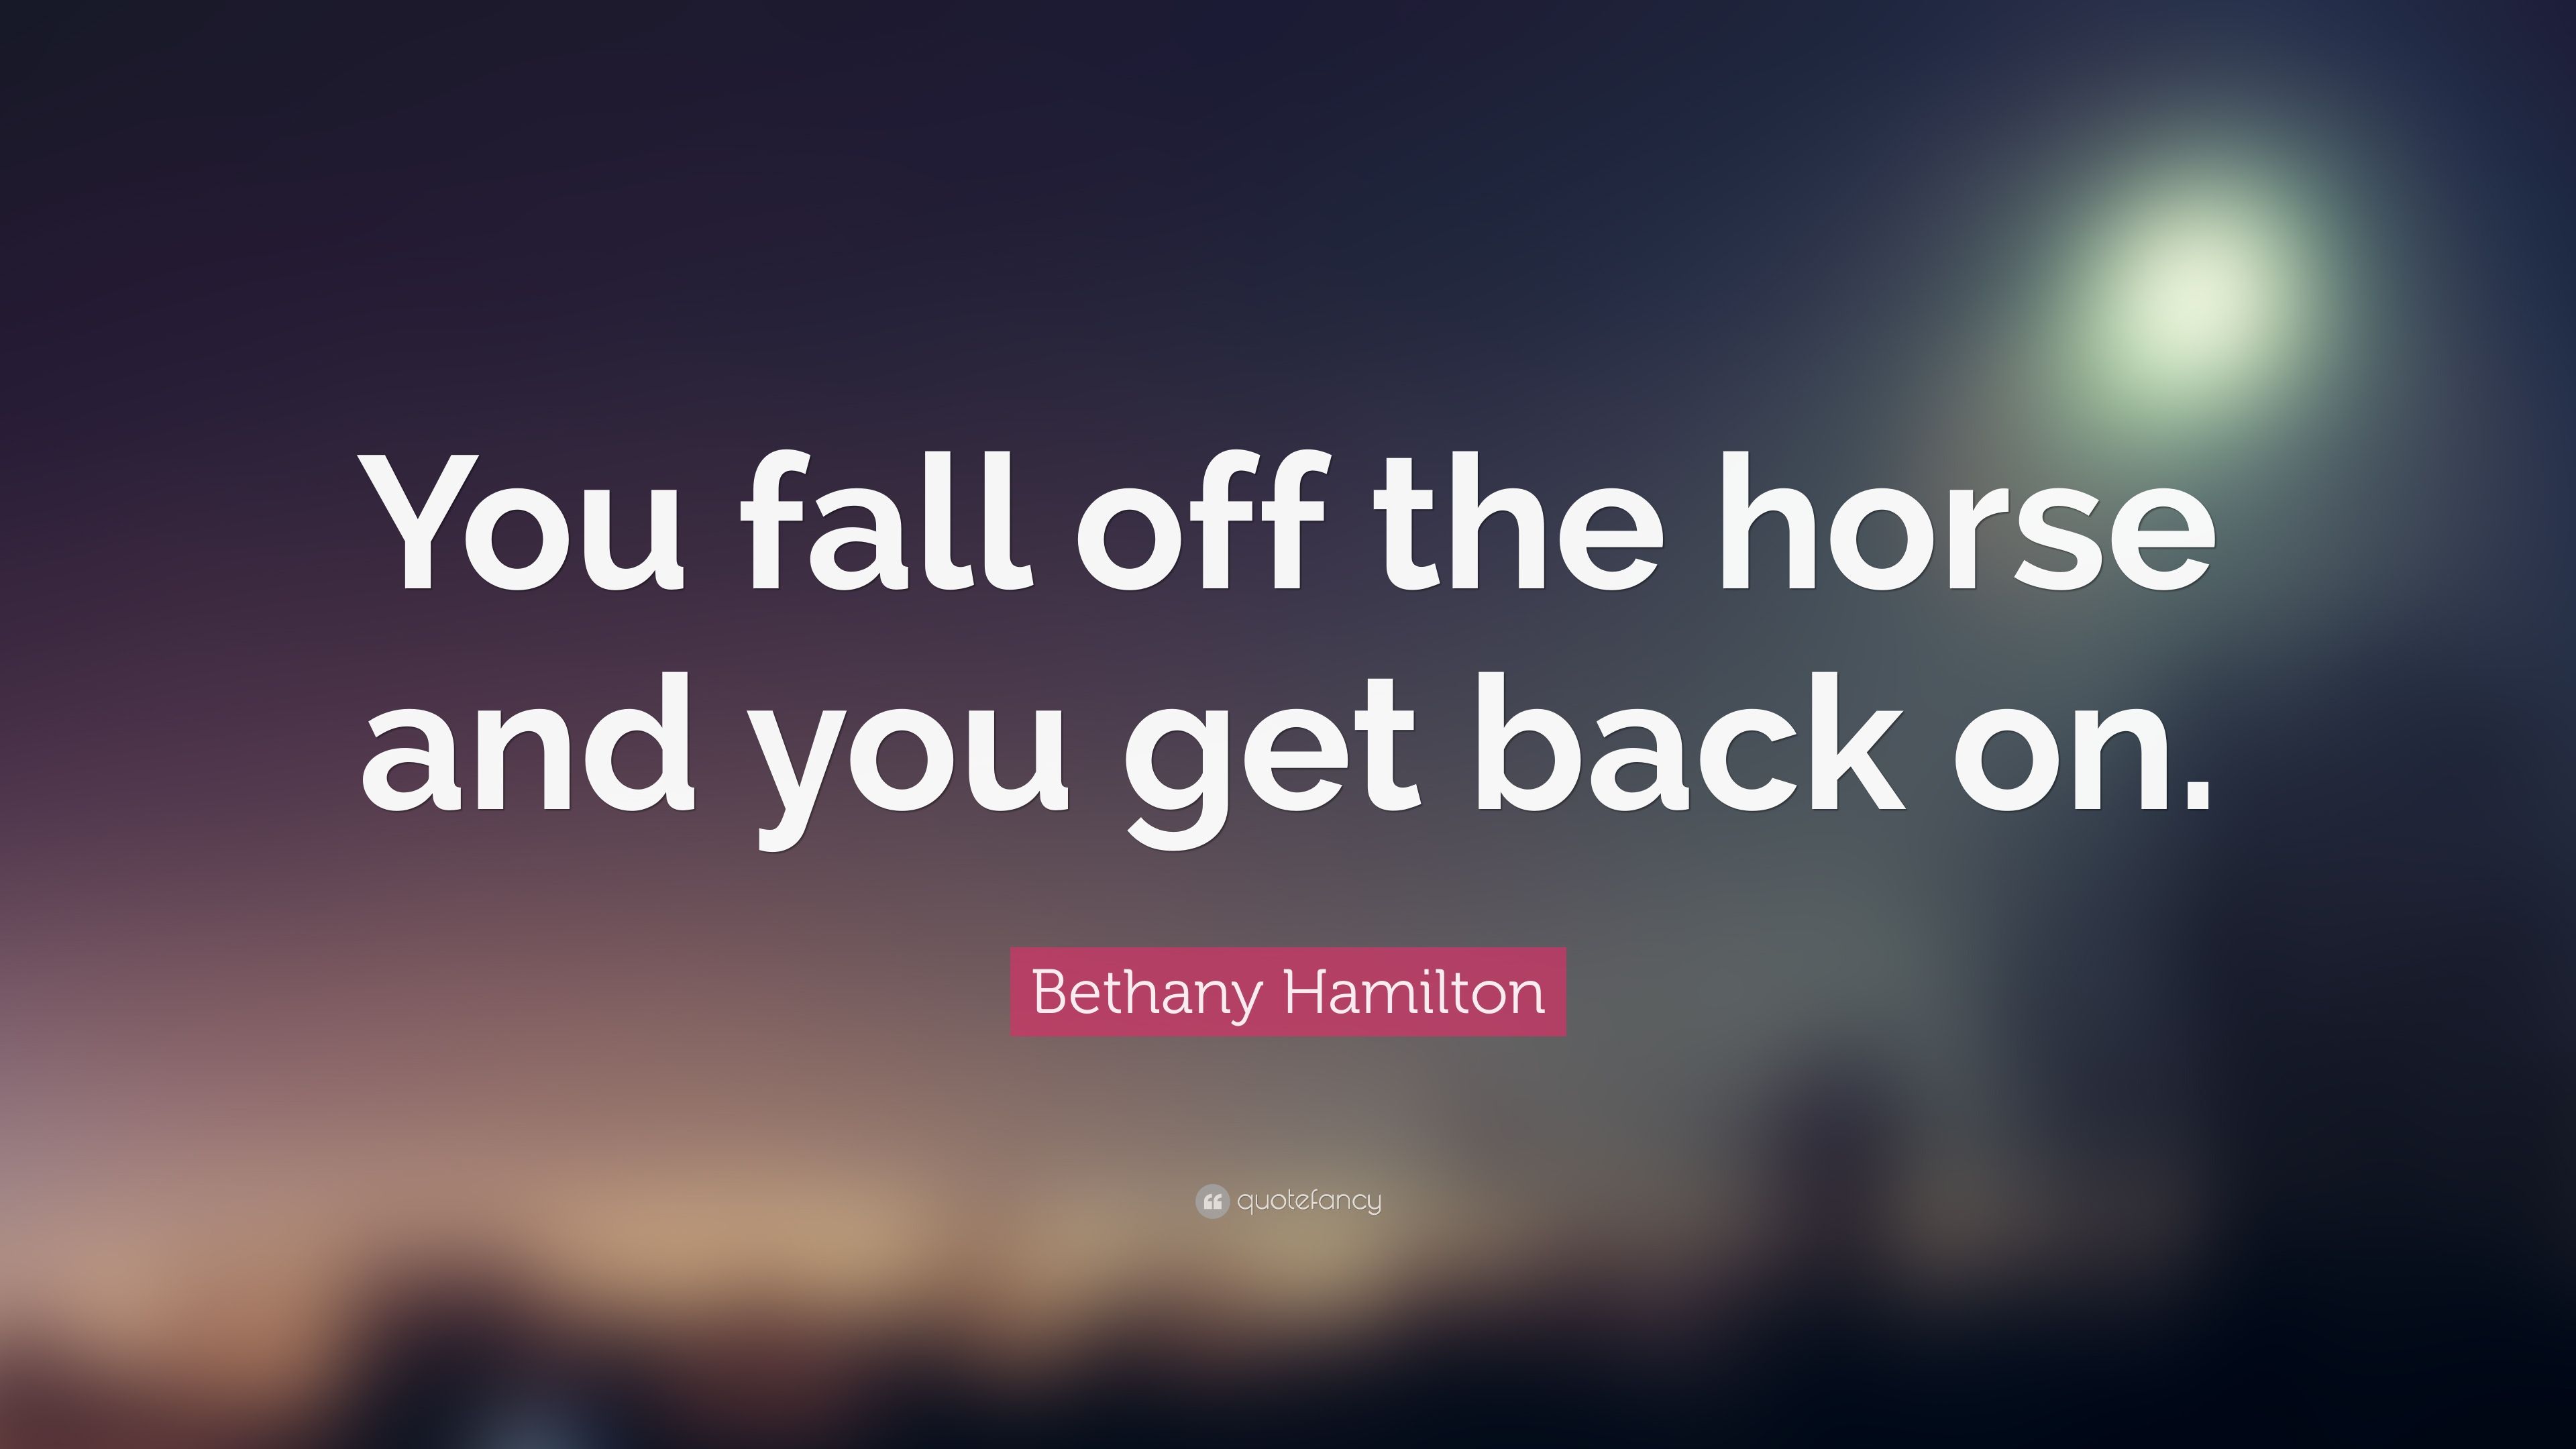 Bethany Hamilton Quote: “You fall off the horse and you get back